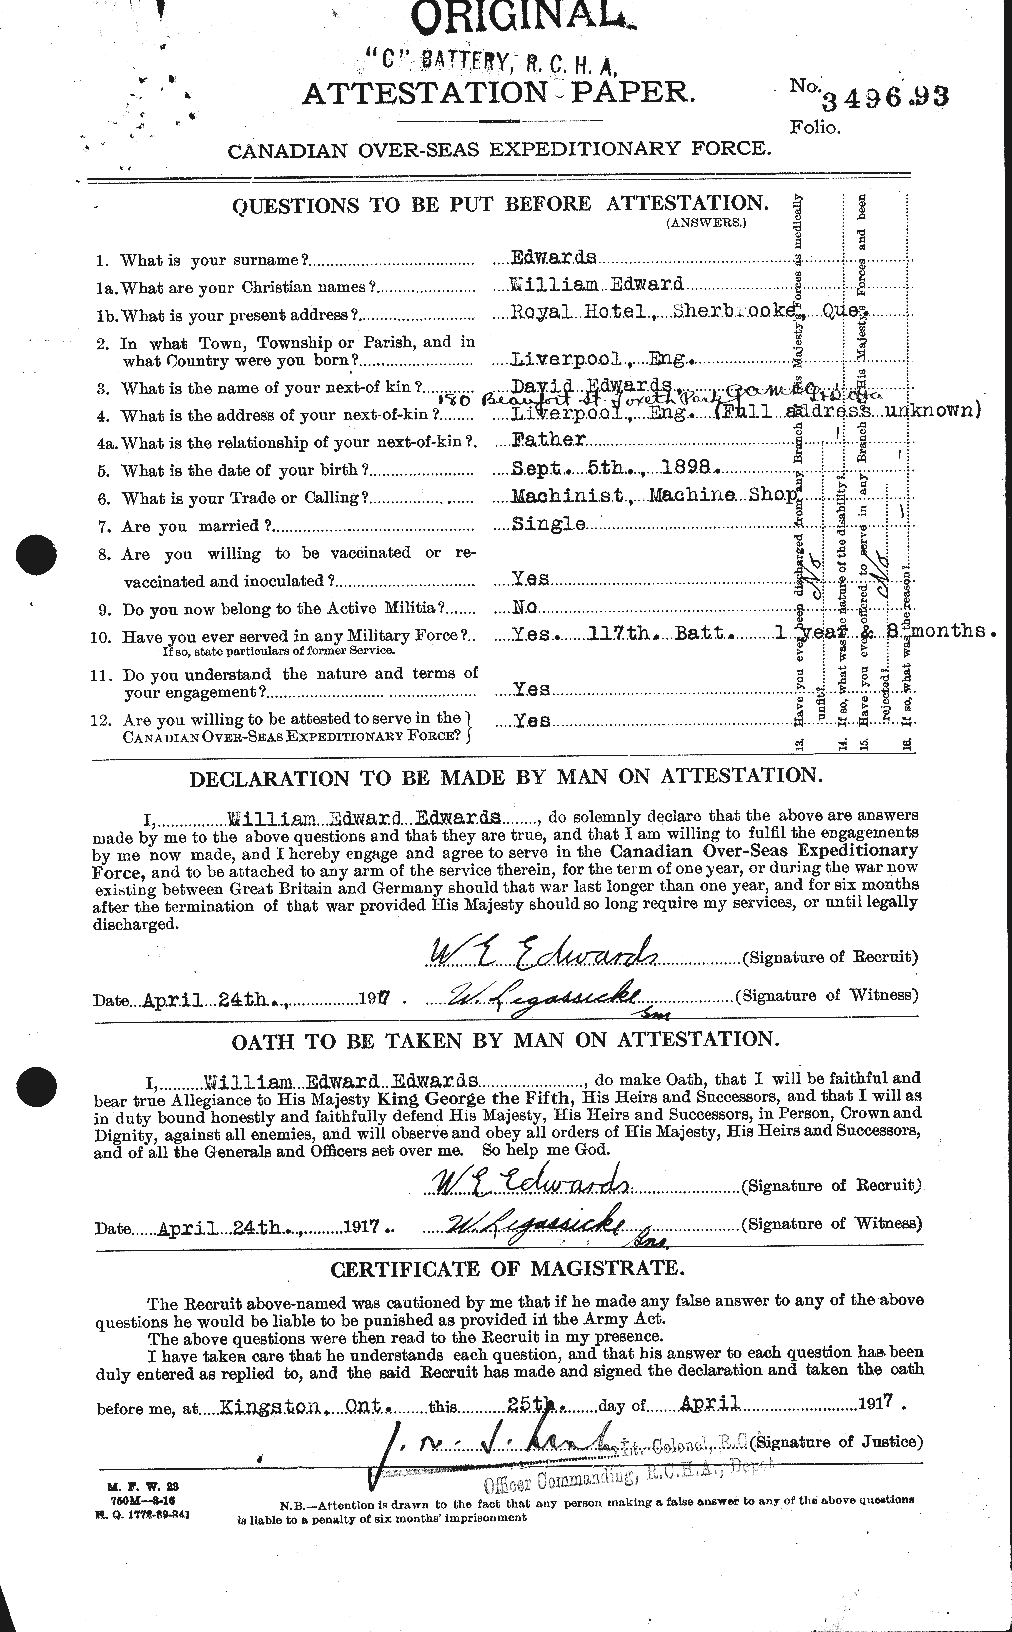 Personnel Records of the First World War - CEF 310420a